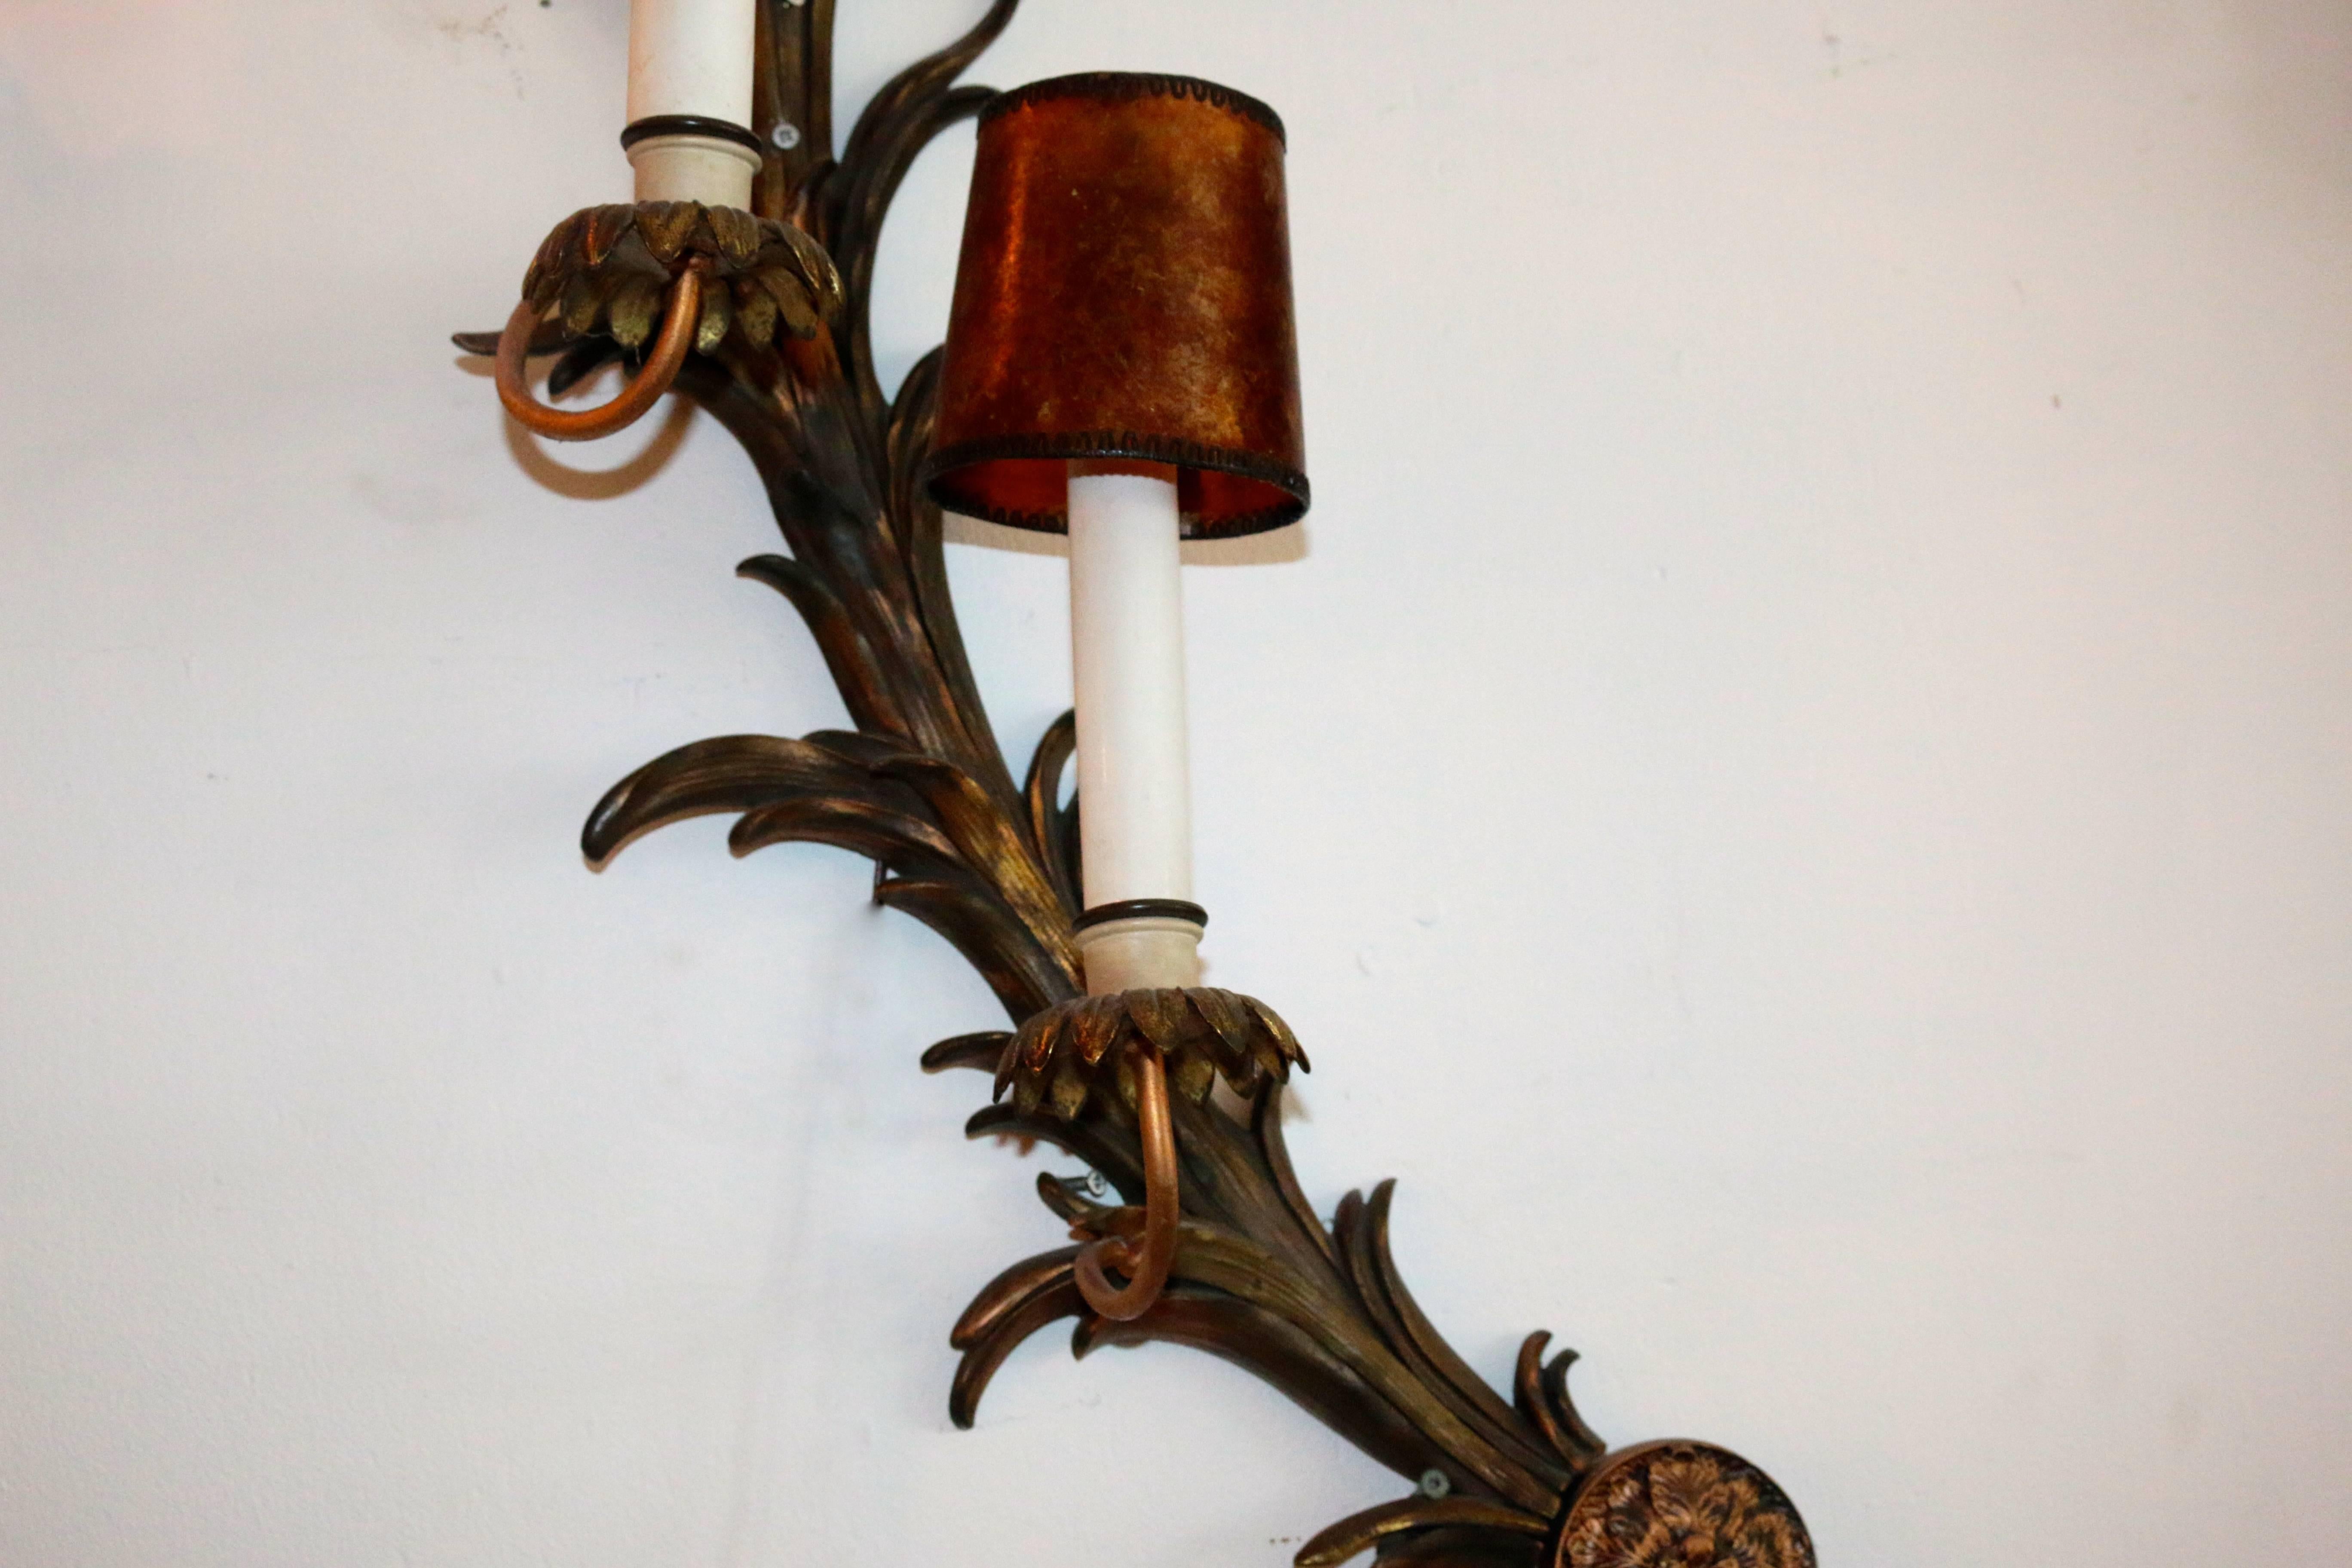 Monumental French Antique Rococo Bronze half moon sconces.
Each with four lights.
Removable mica shades.